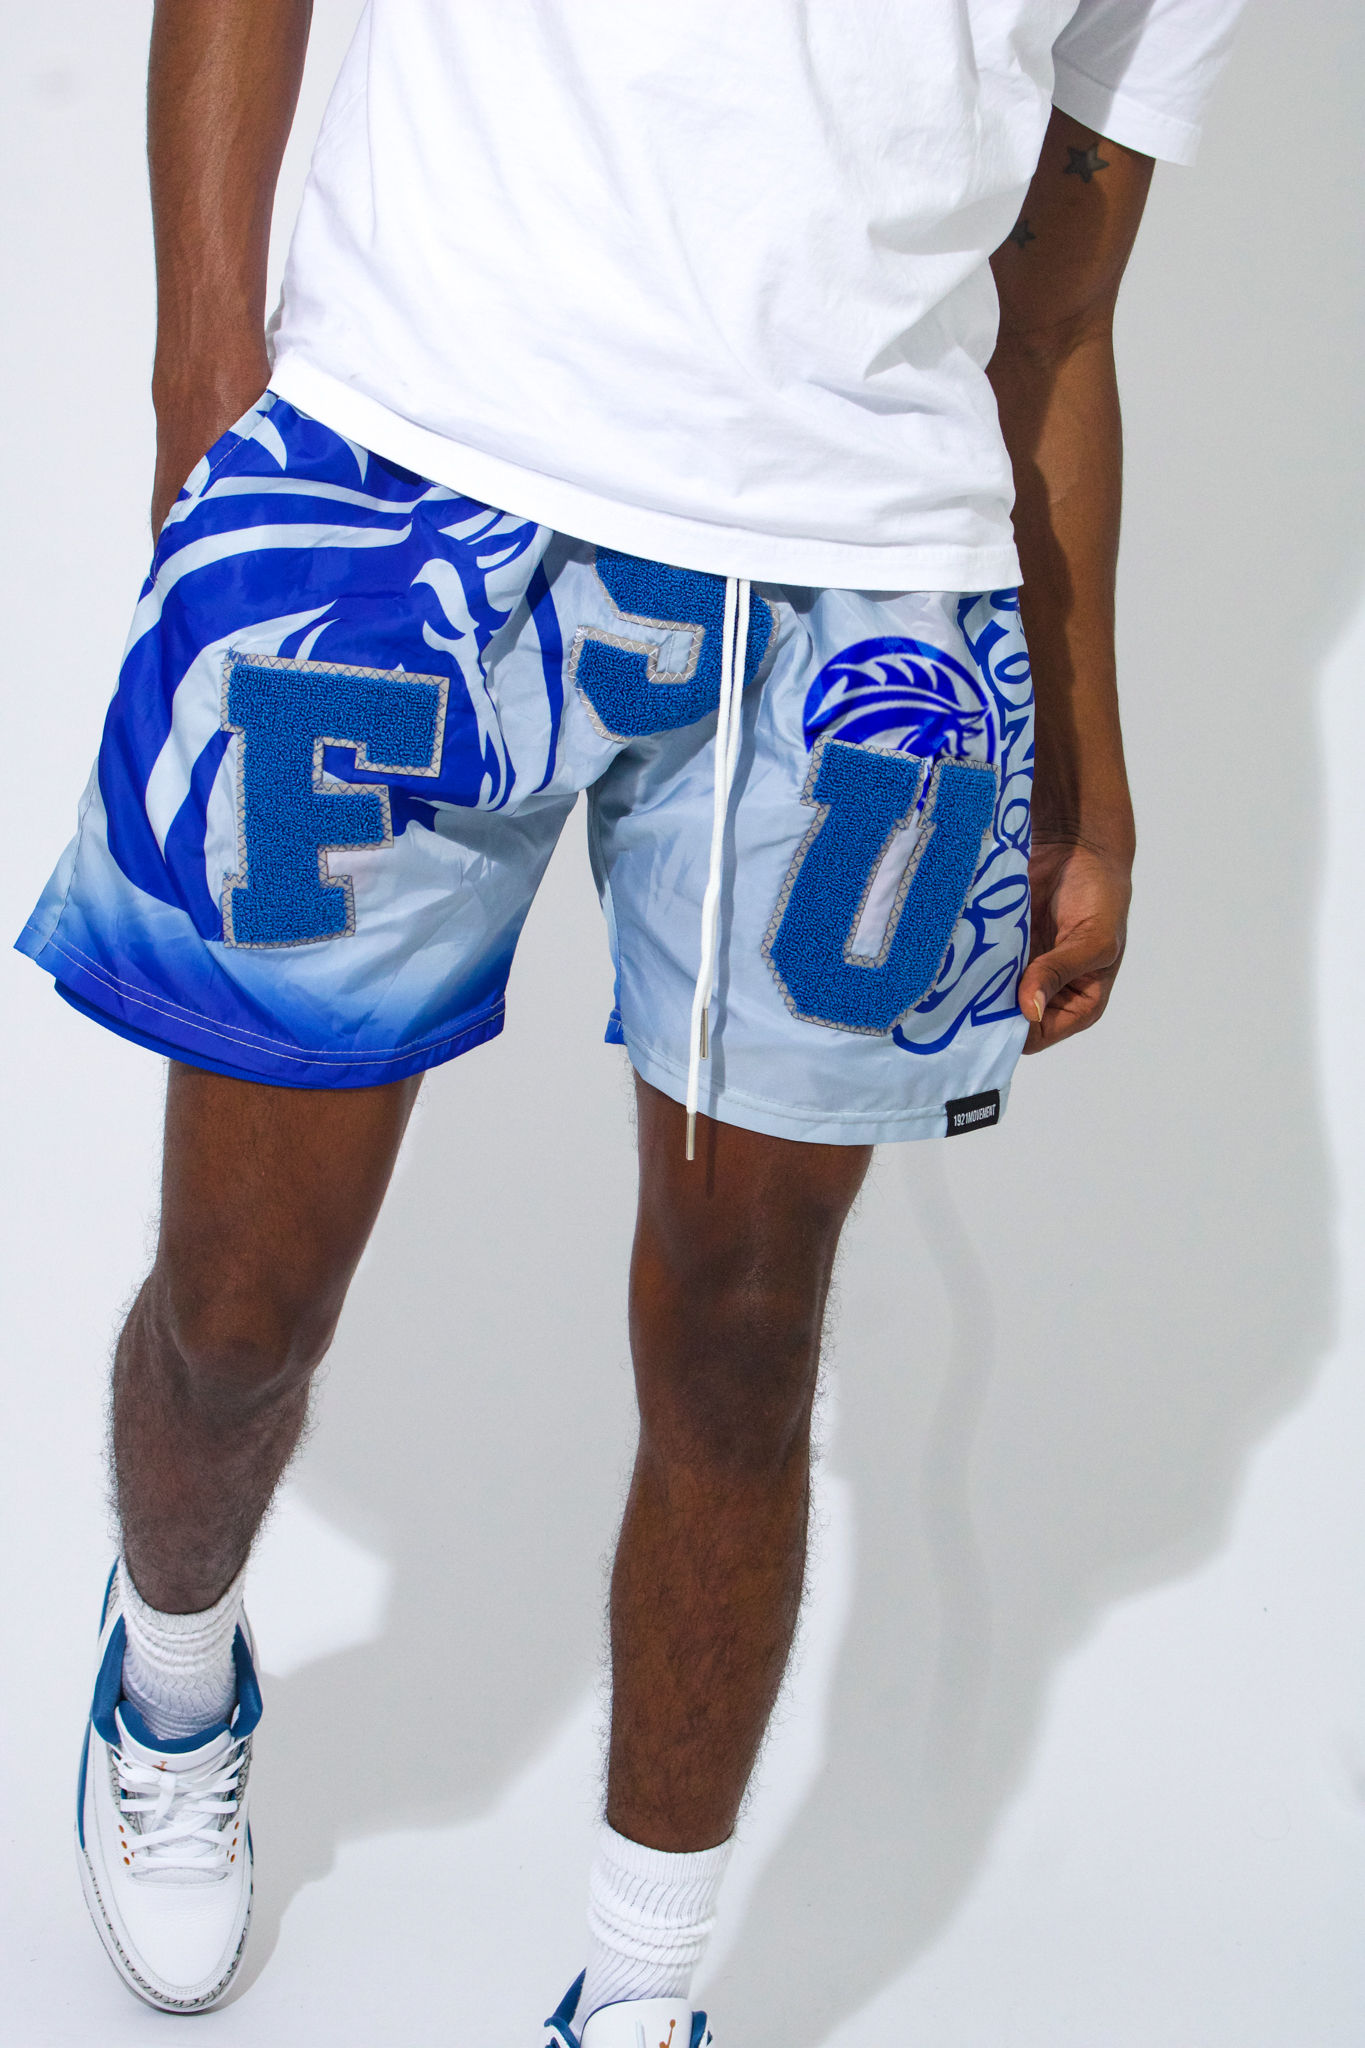 Fayetteville State Shorts - Fayetteville State Apparel and Clothing - 1921 movement